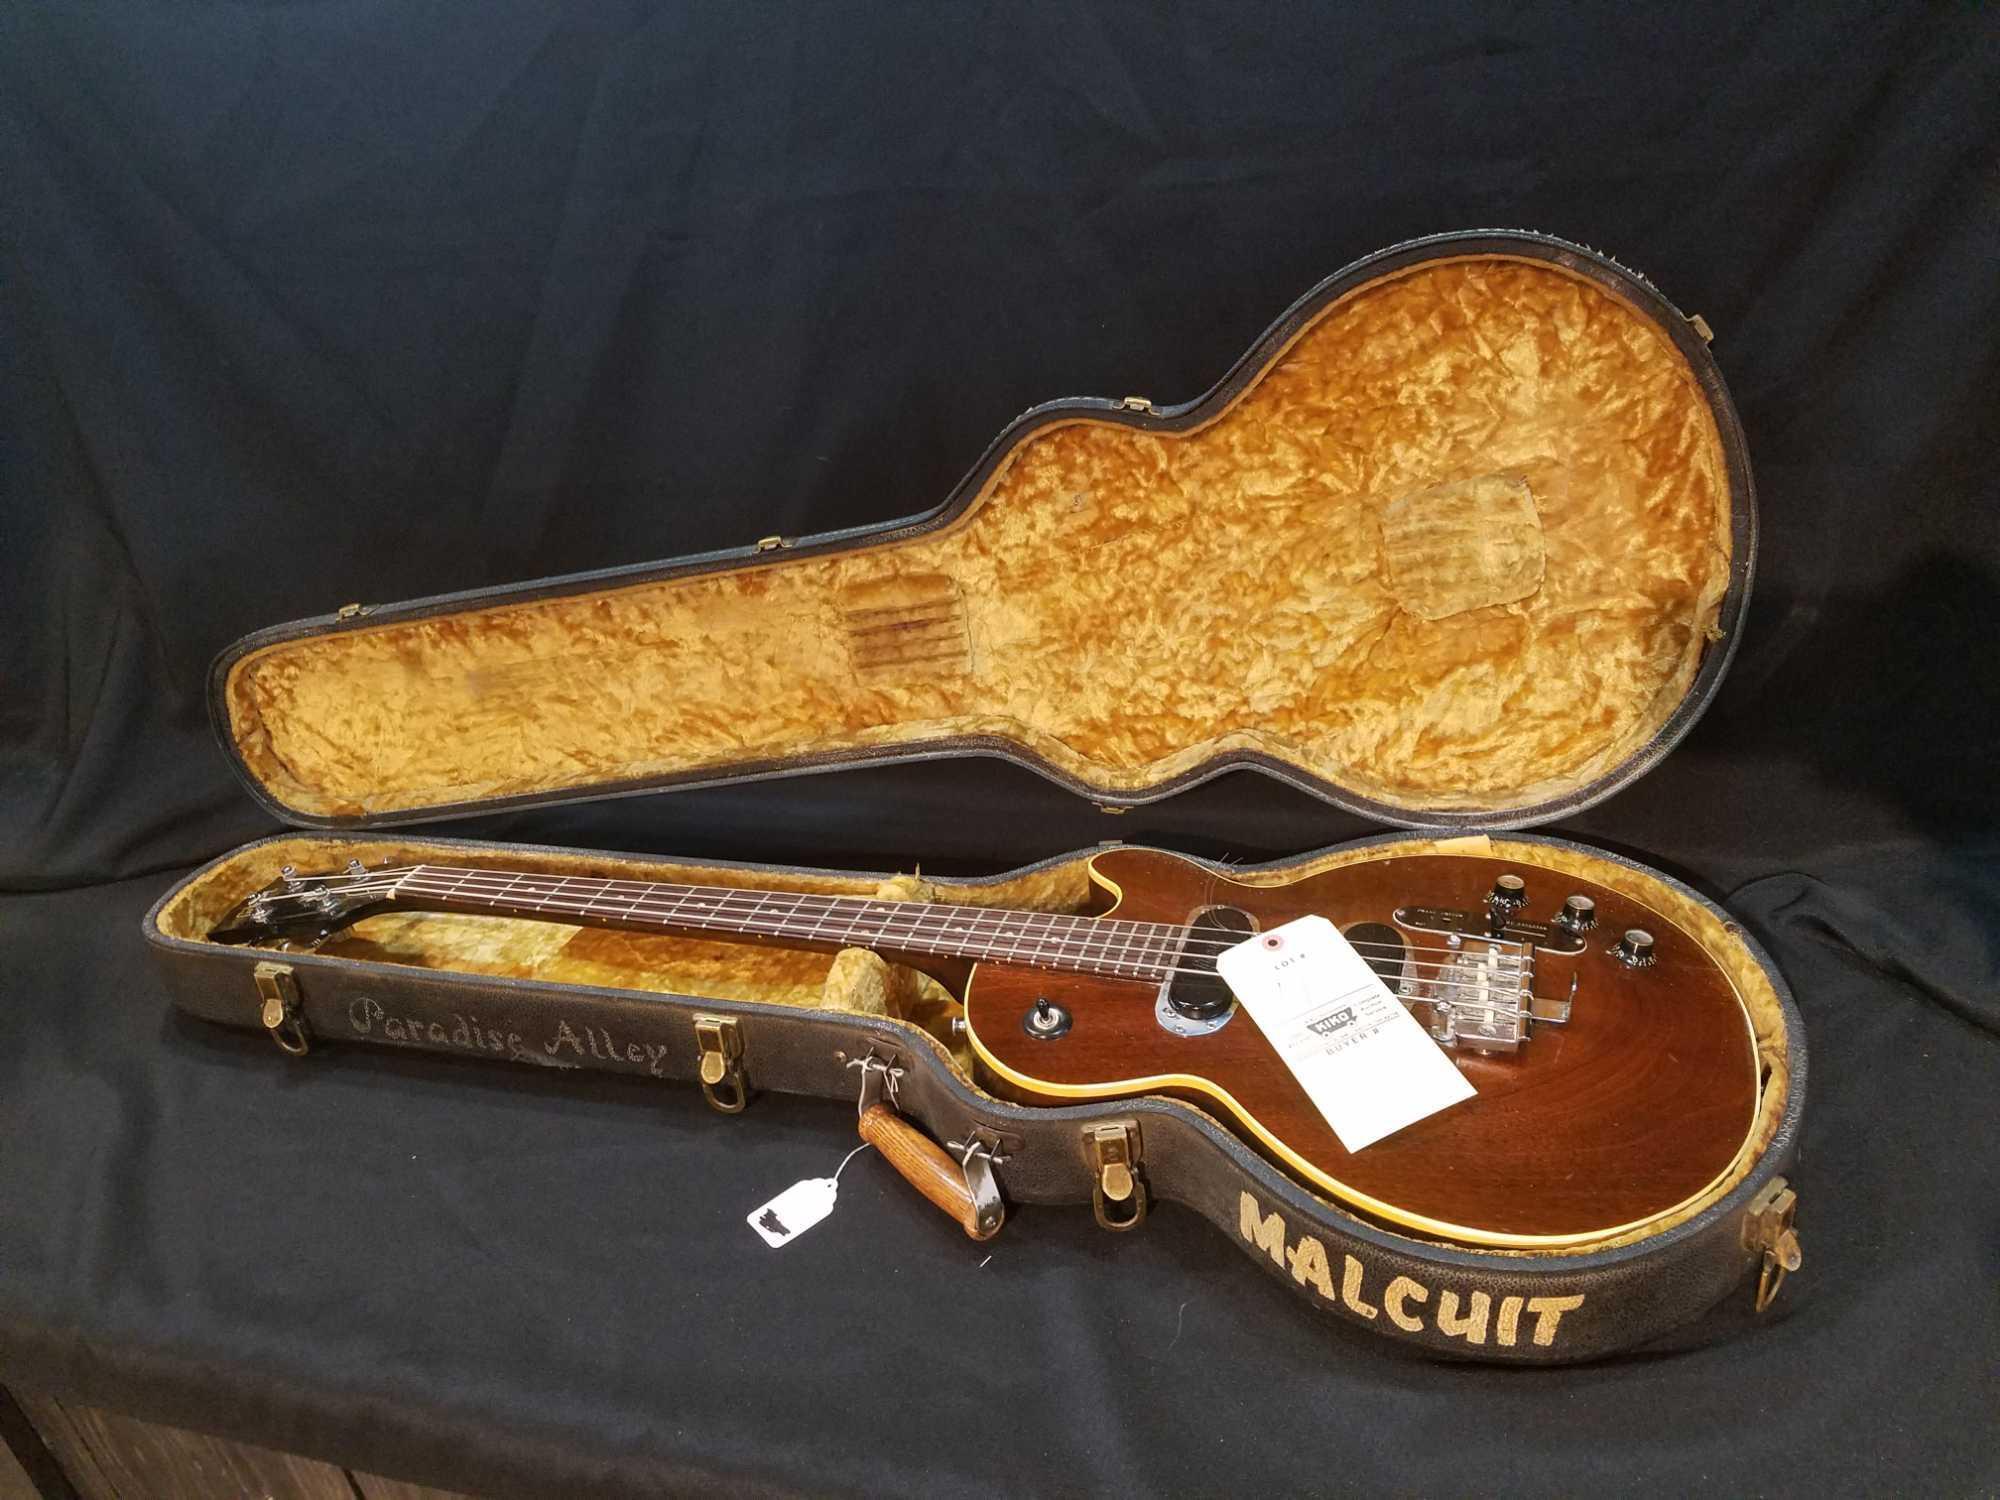 1969 Gibson Les Paul bass with original case